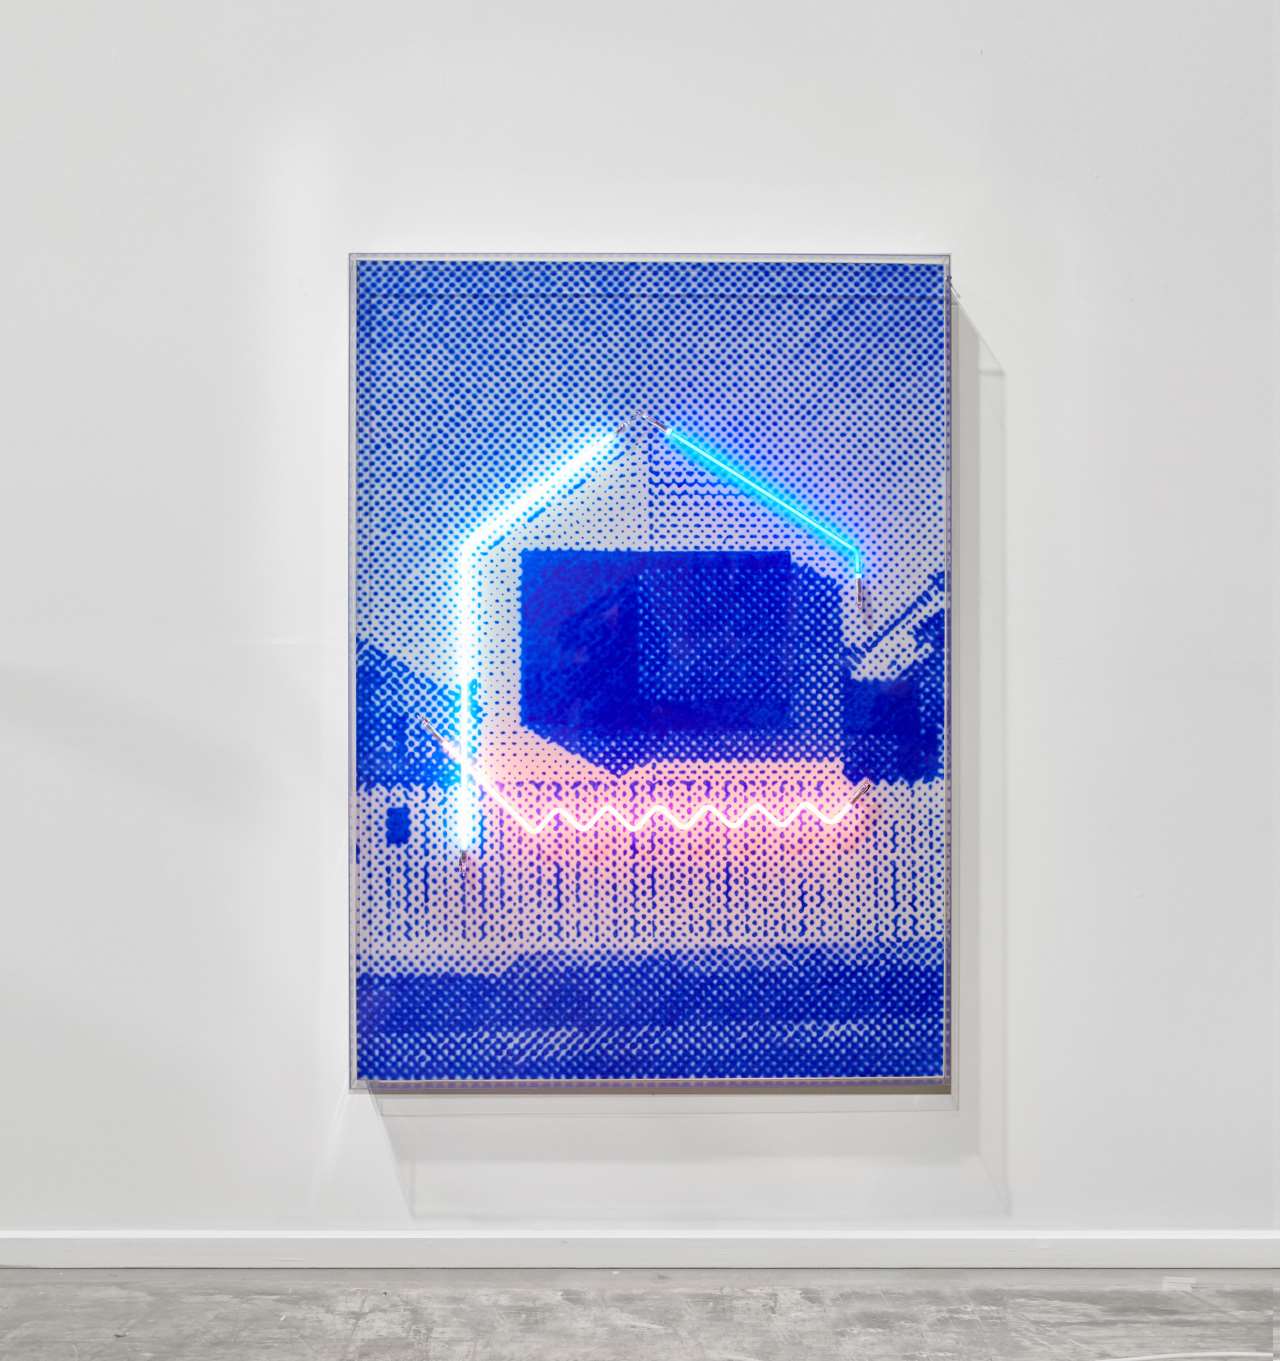 Tom Adair, Picture perfect with a white picket fence, Airbrush acrylic polymer and neon on dibond, acrylic frame, 115x160cm. © Tom Adair.